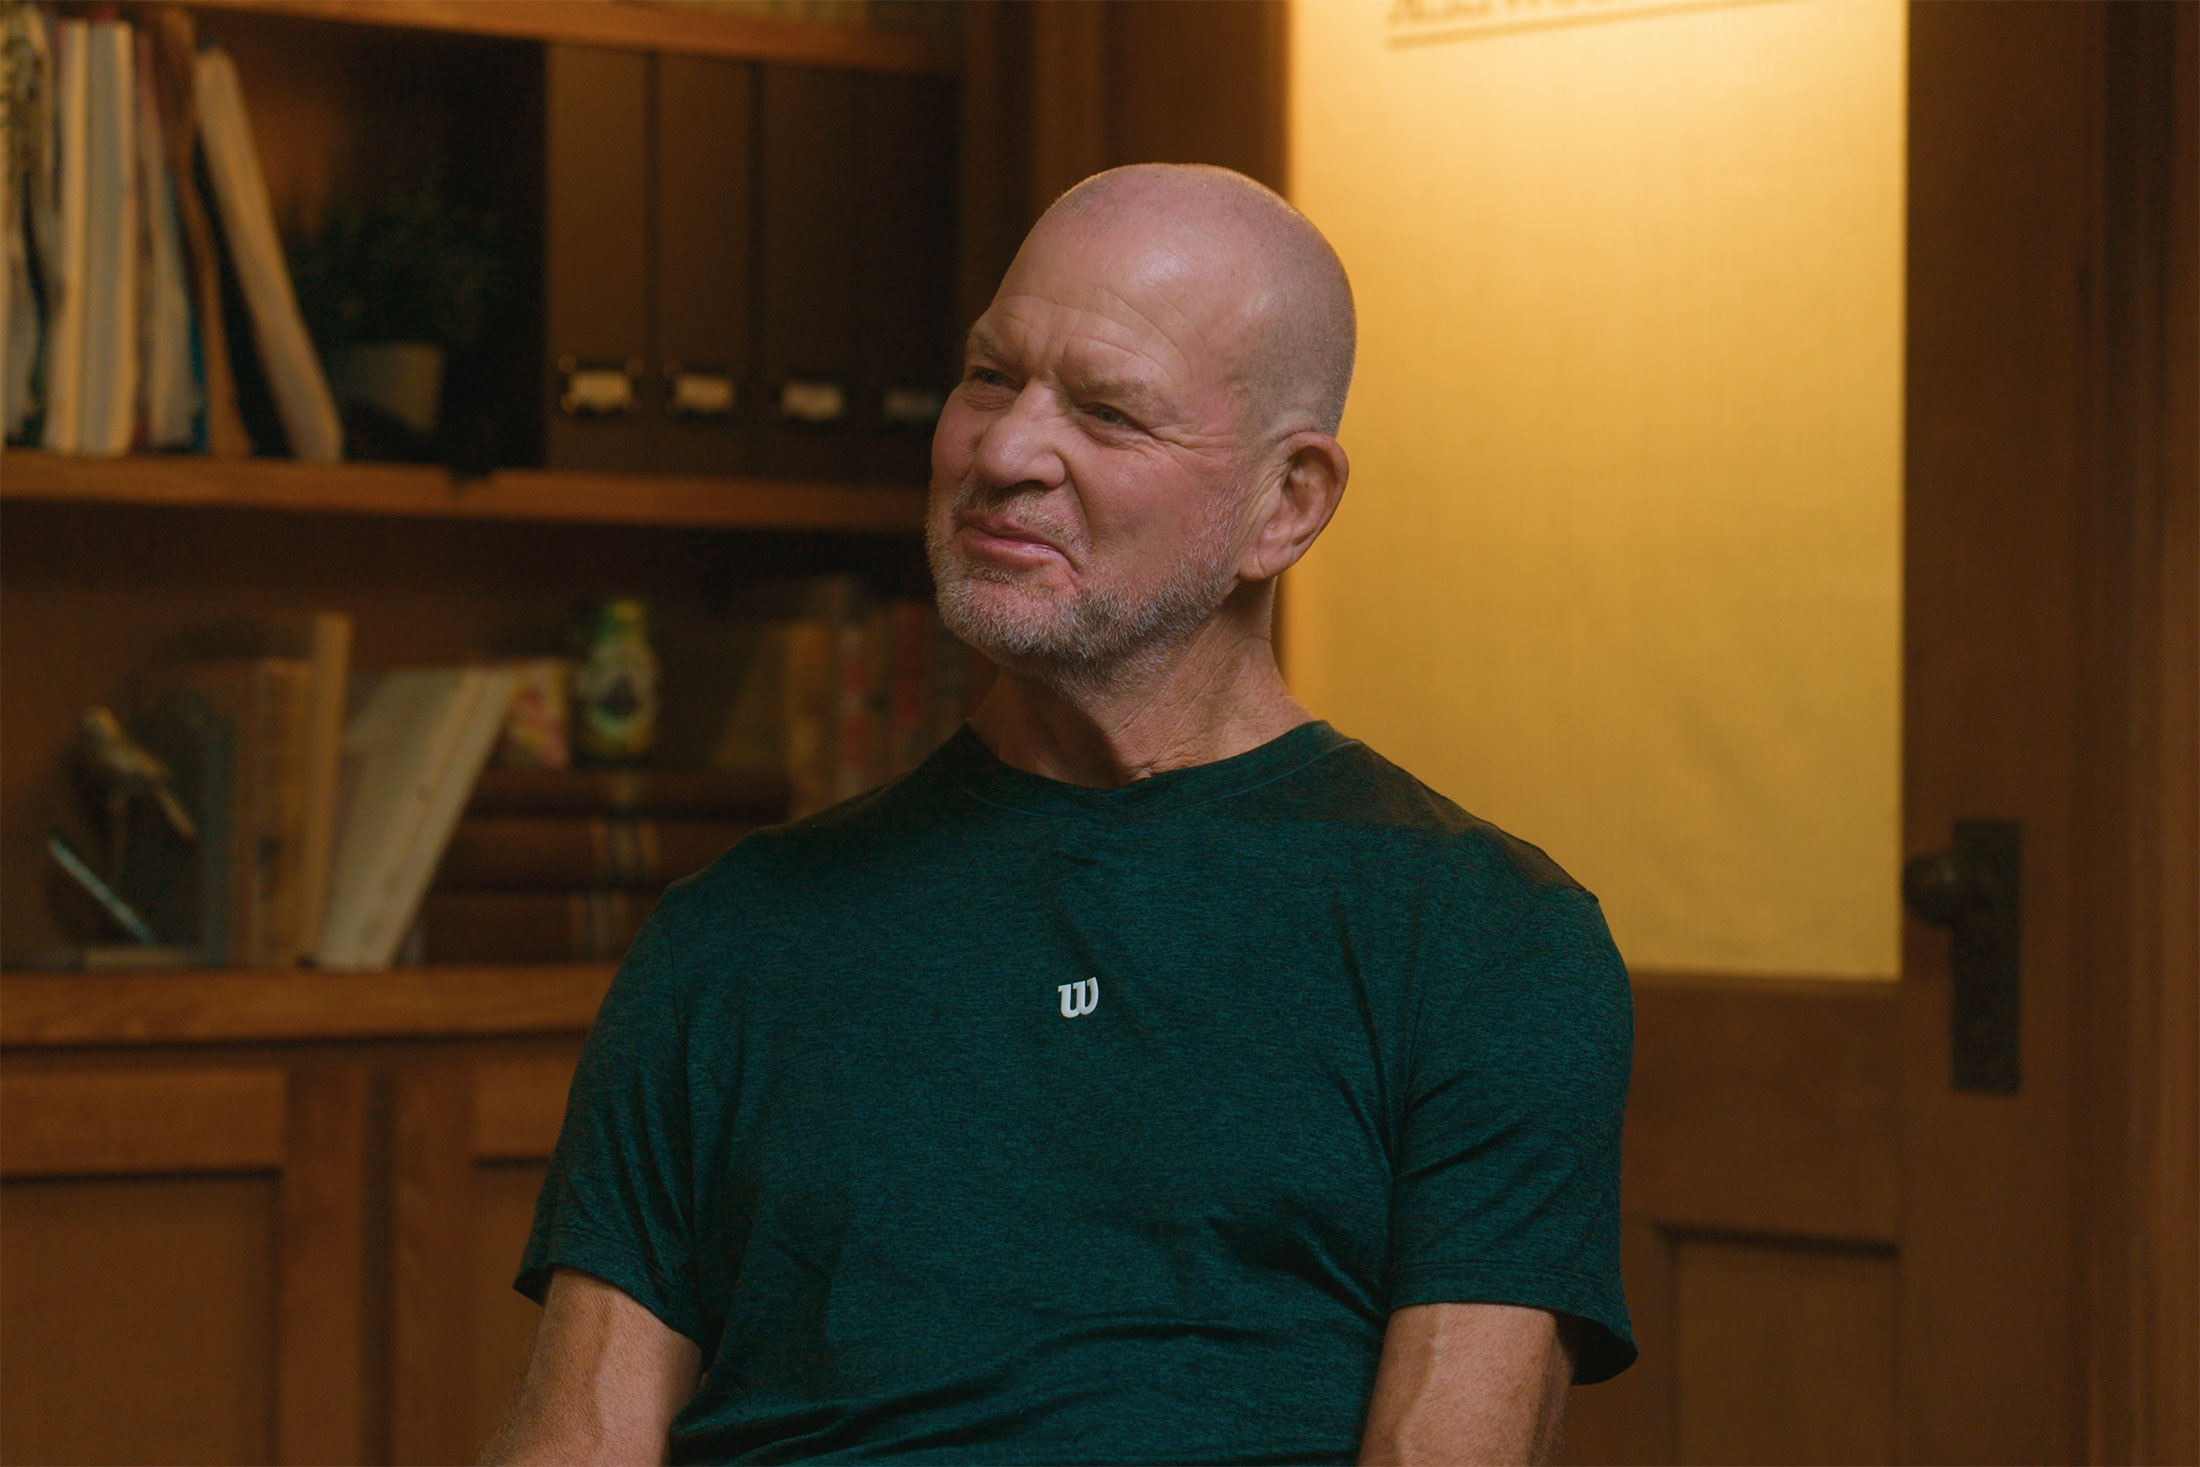 Lululemon Founder Chip Wilson Races to Find Muscular Dystrophy Cure -  Bloomberg